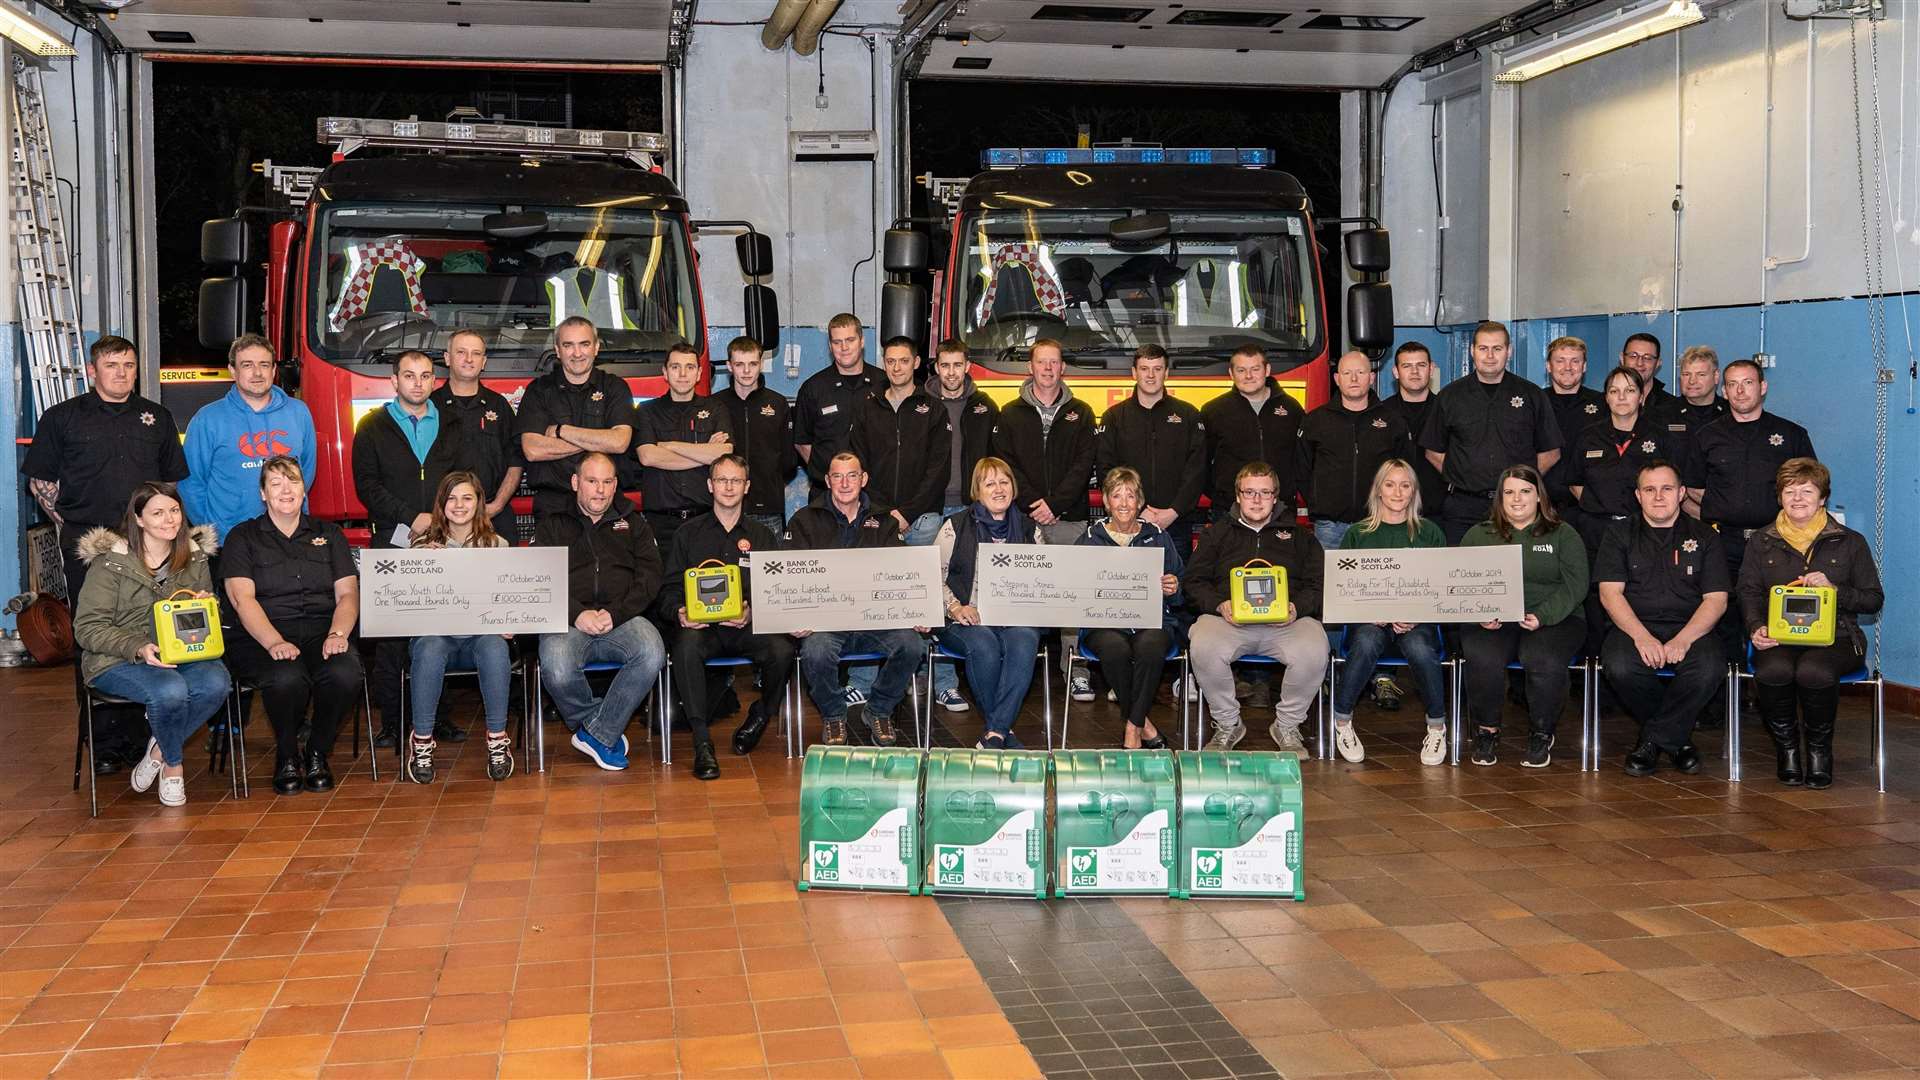 Some of the Thurso firefighters with the defibrillators the security cabinets, and representatives of the local premises where the lifesaving devices will be installed, as well as members of the four community receiving cheques. Picture: Stevie Bruce